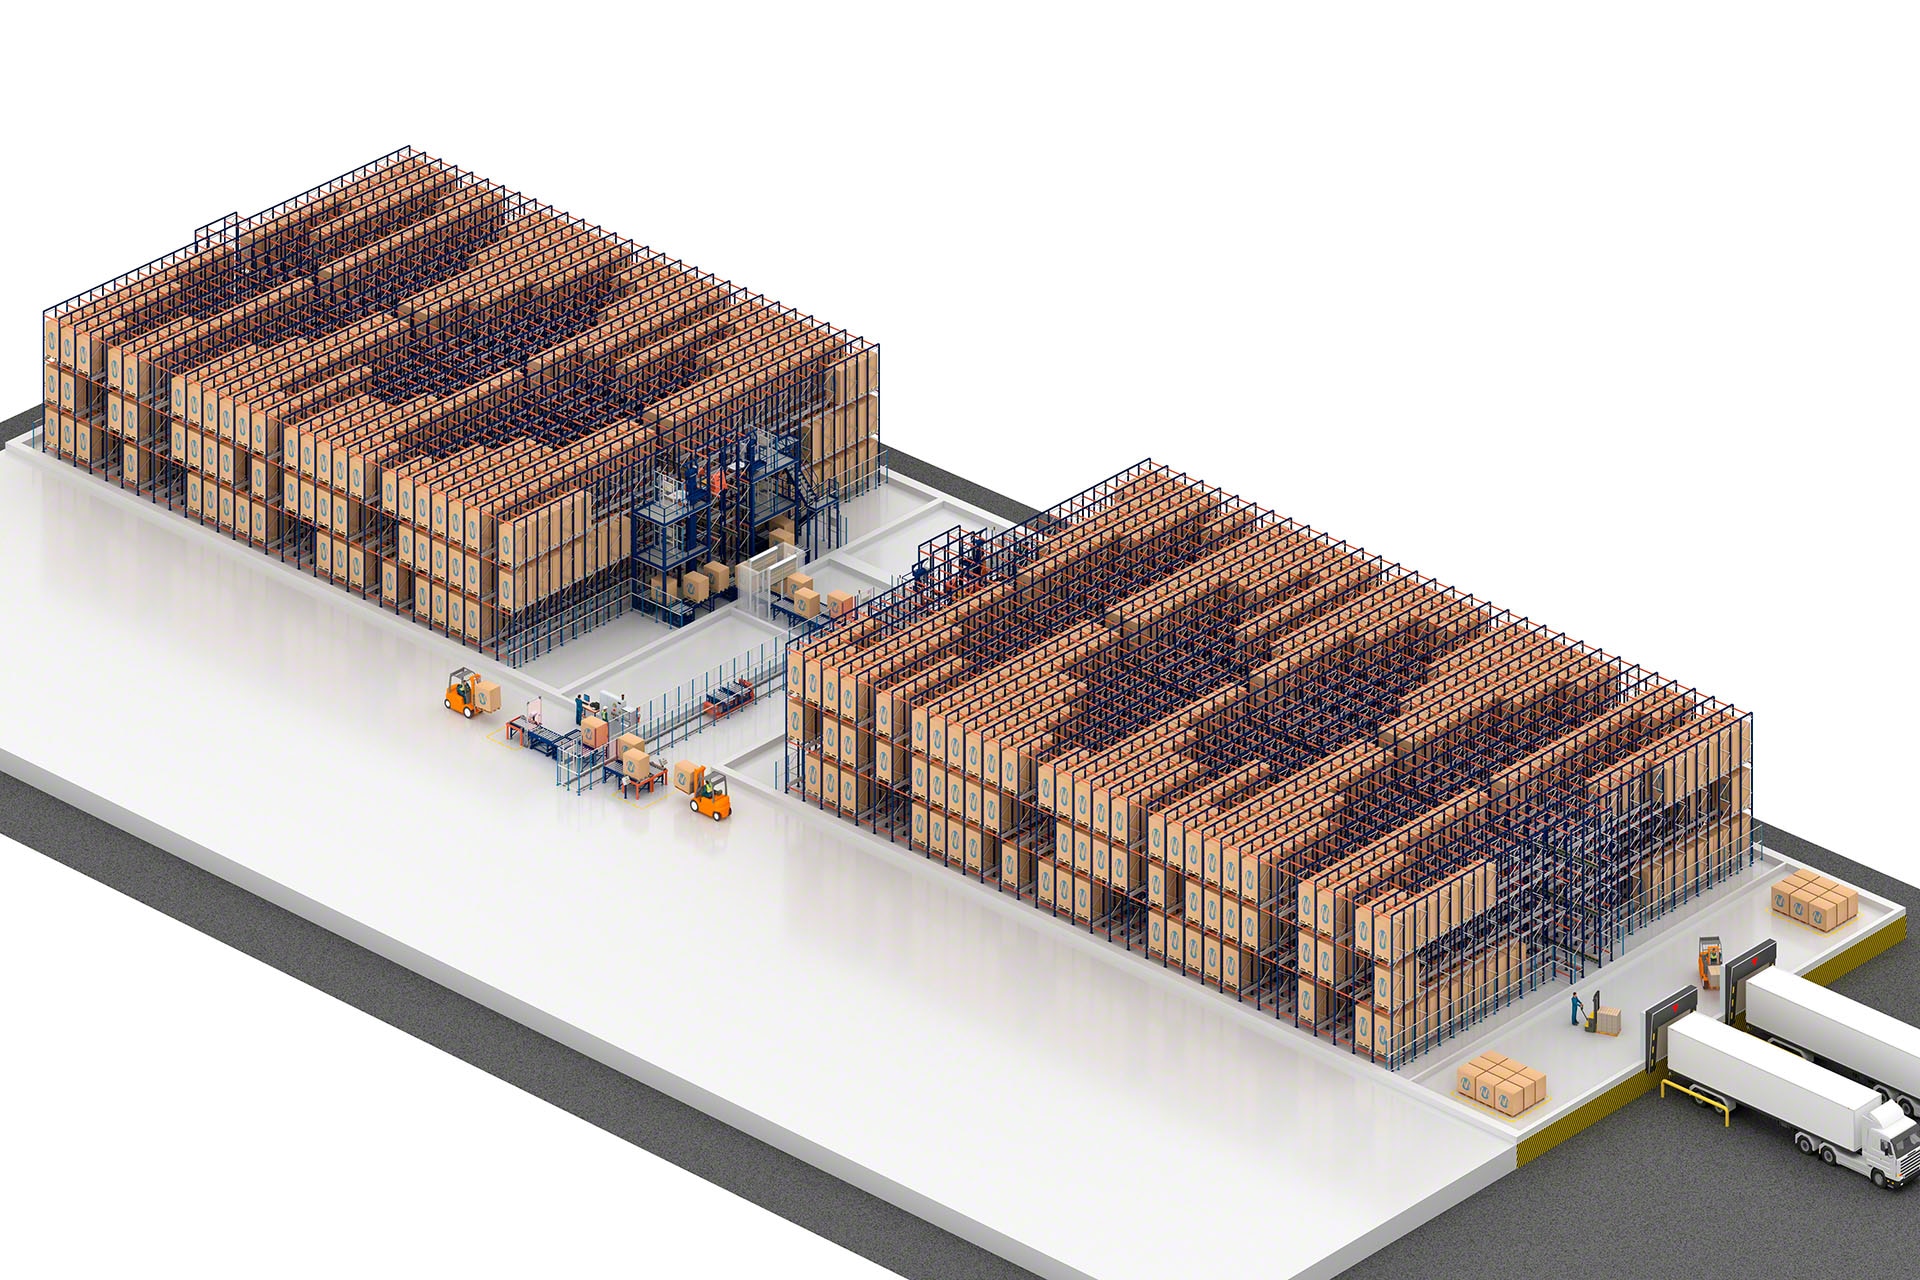 The automatic Pallet Shuttle technology allows the warehouse to have several bays through an aisle with transfer car